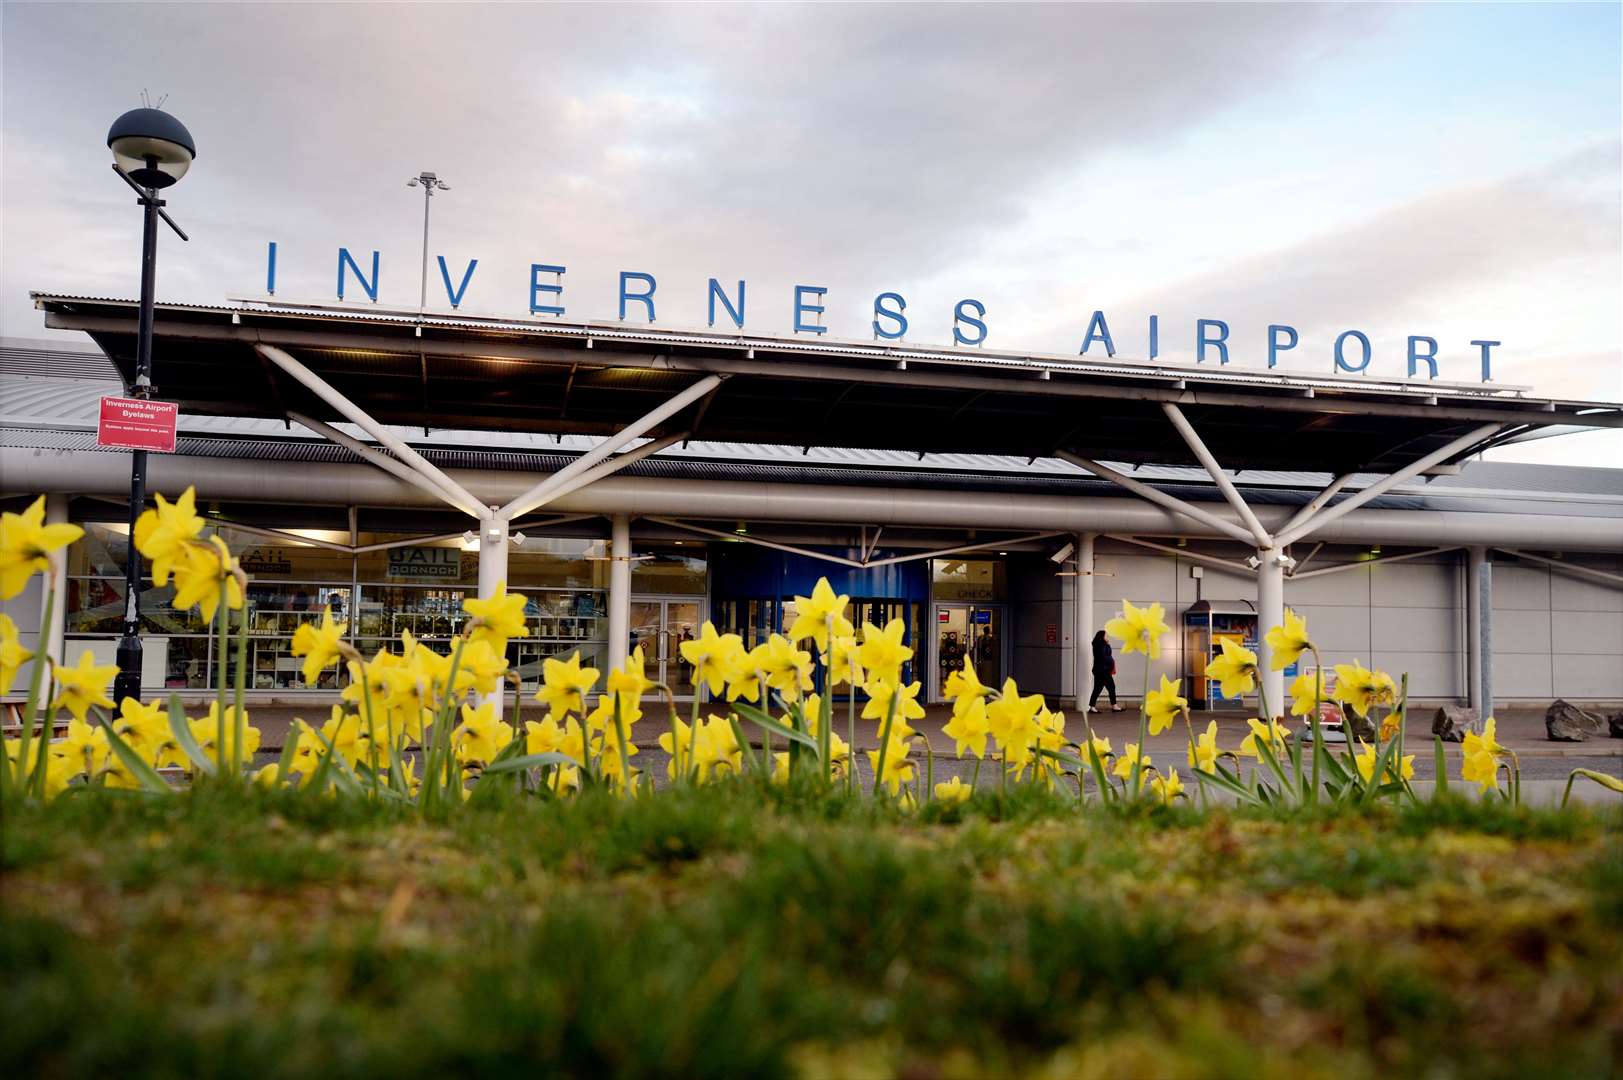 Flights are set to be grounded at Inverness Airport on Thursday as air traffic controllers go on strike.